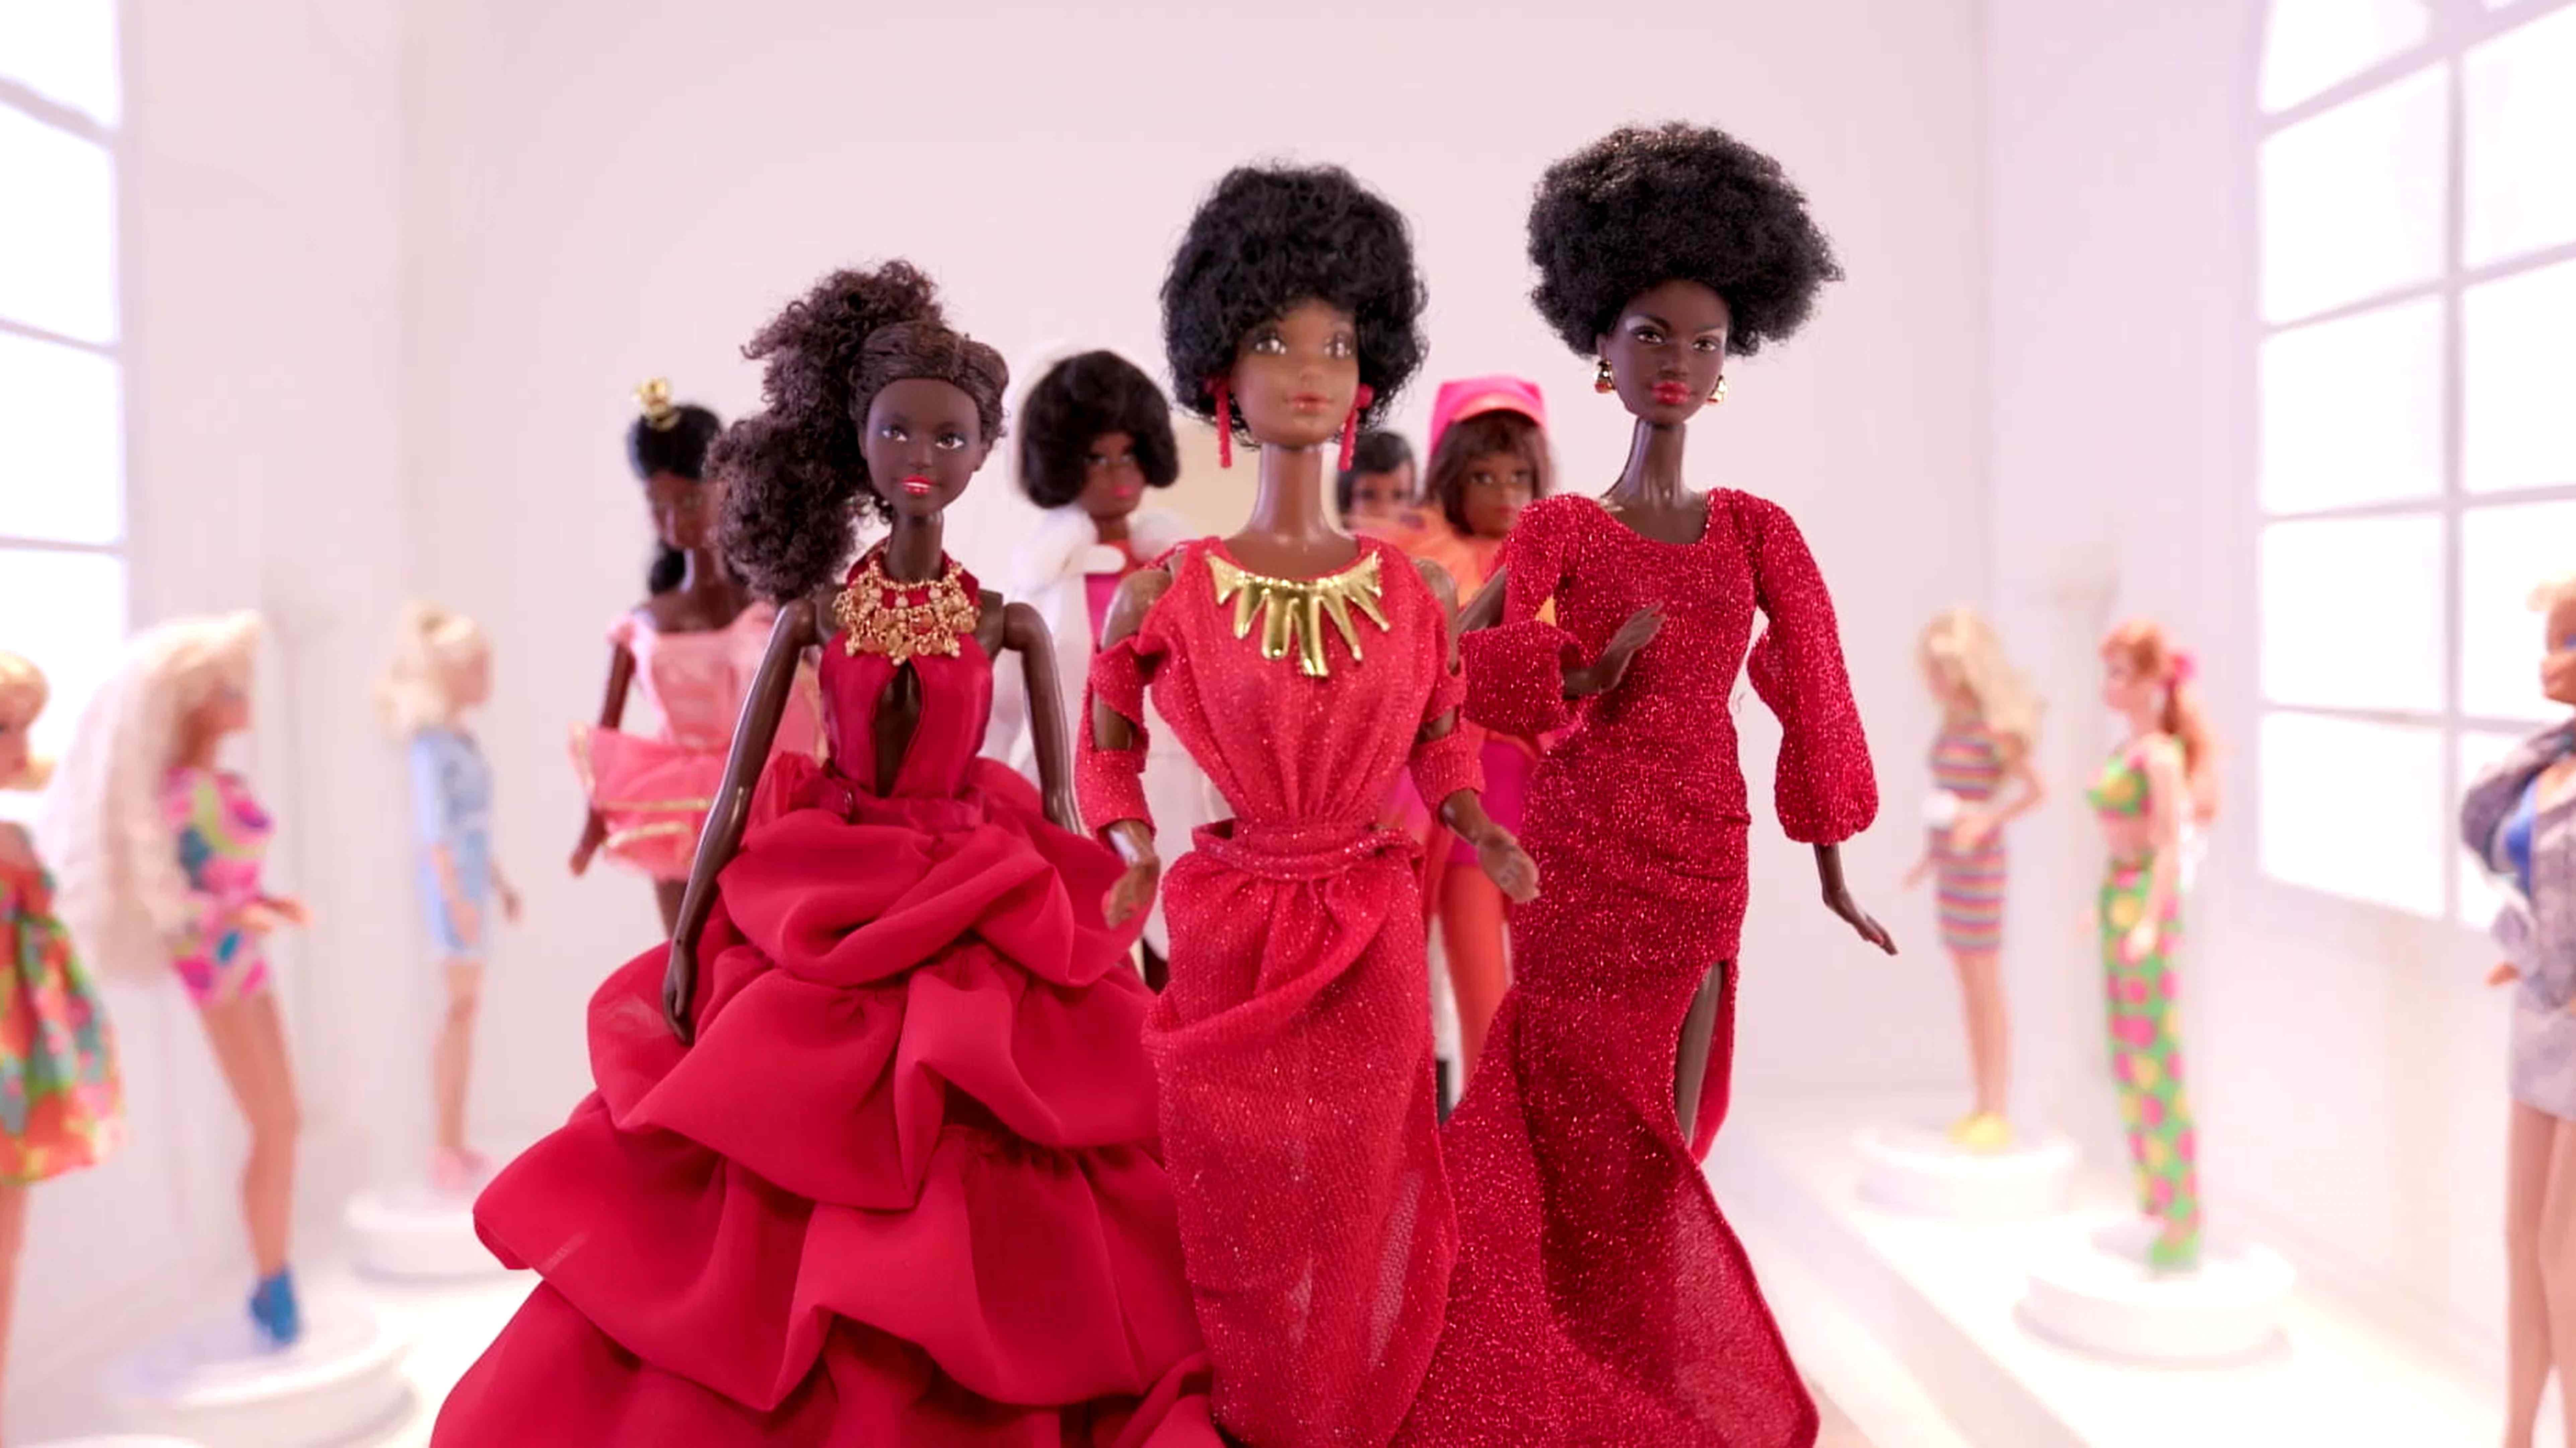 'Black Barbie' Trailer: First Footage From Shonda Rhimes-Produced Netflix Doc